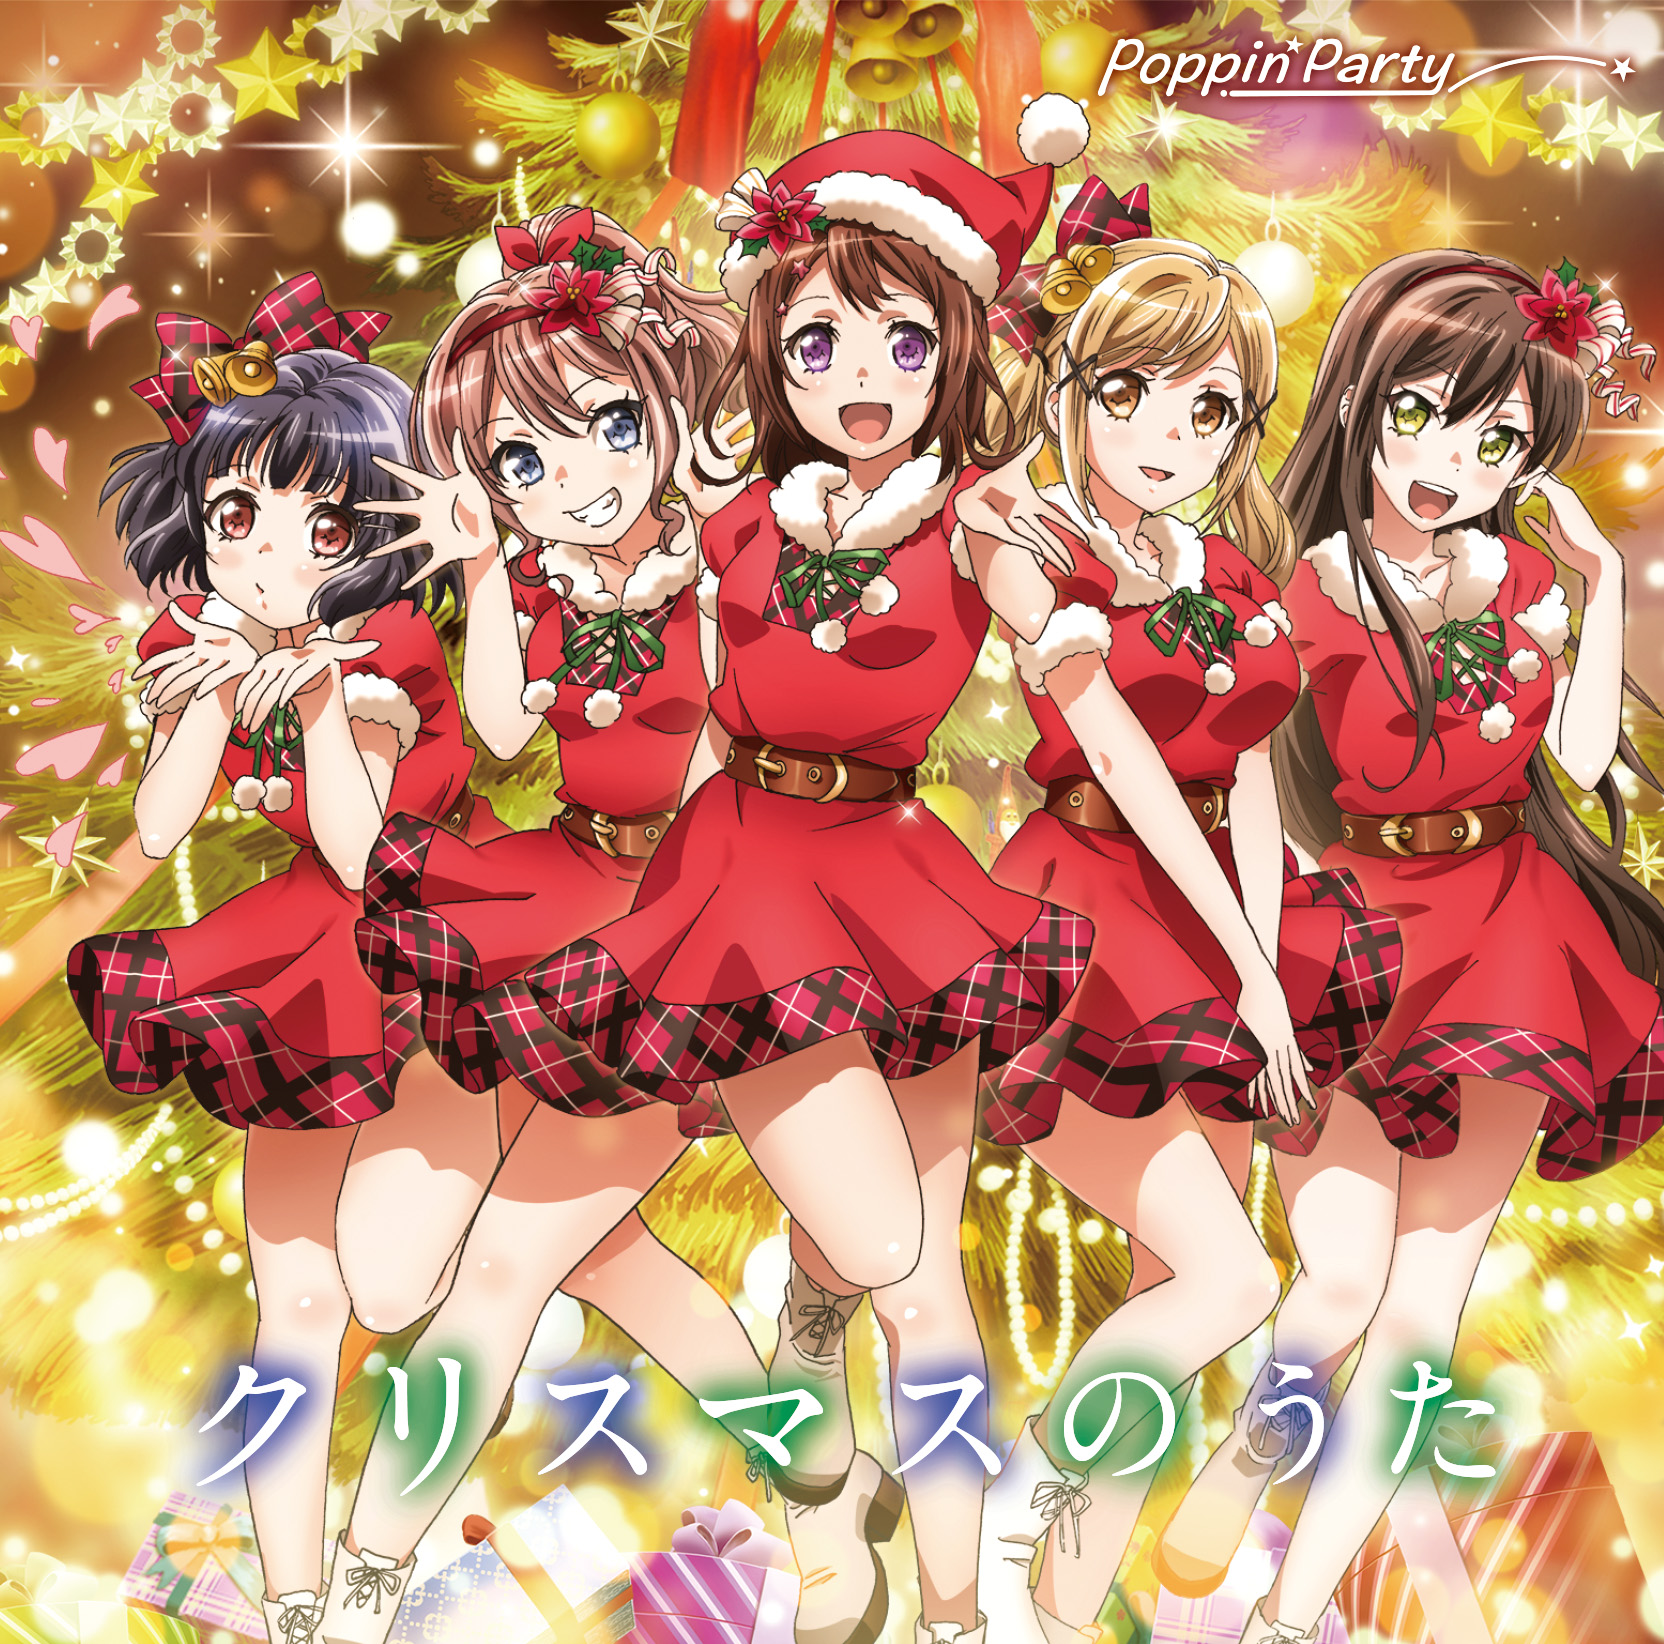 Christmas no Uta (Our Christmas Song) - Poppin'Party